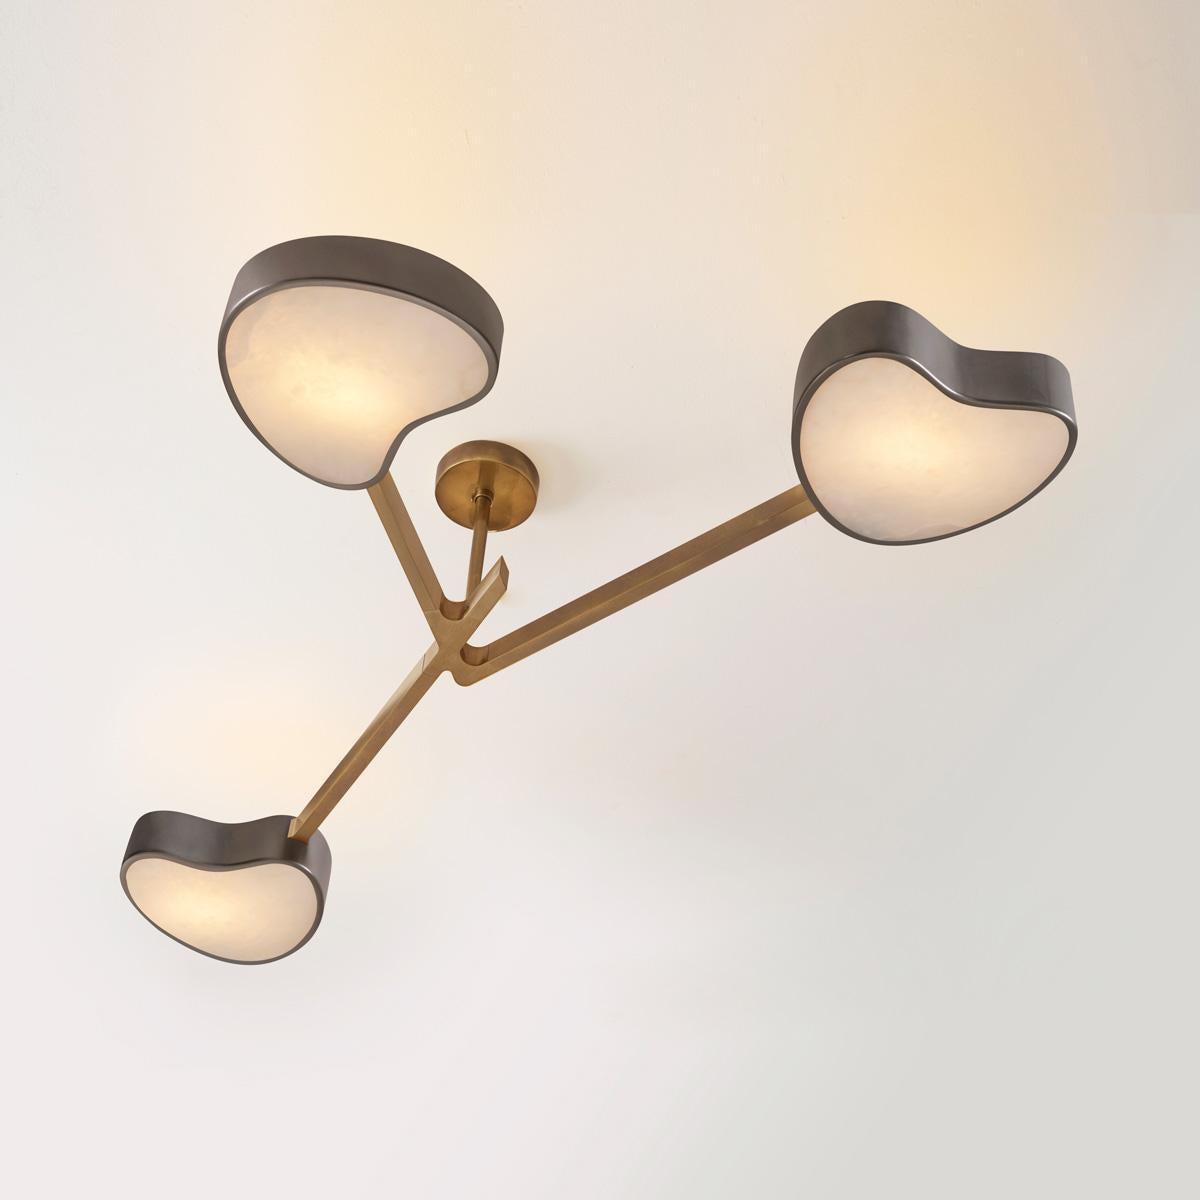 Modern Cuore N.3 Ceiling Light by Gaspare Asaro. Peltro and Bronze Finish For Sale